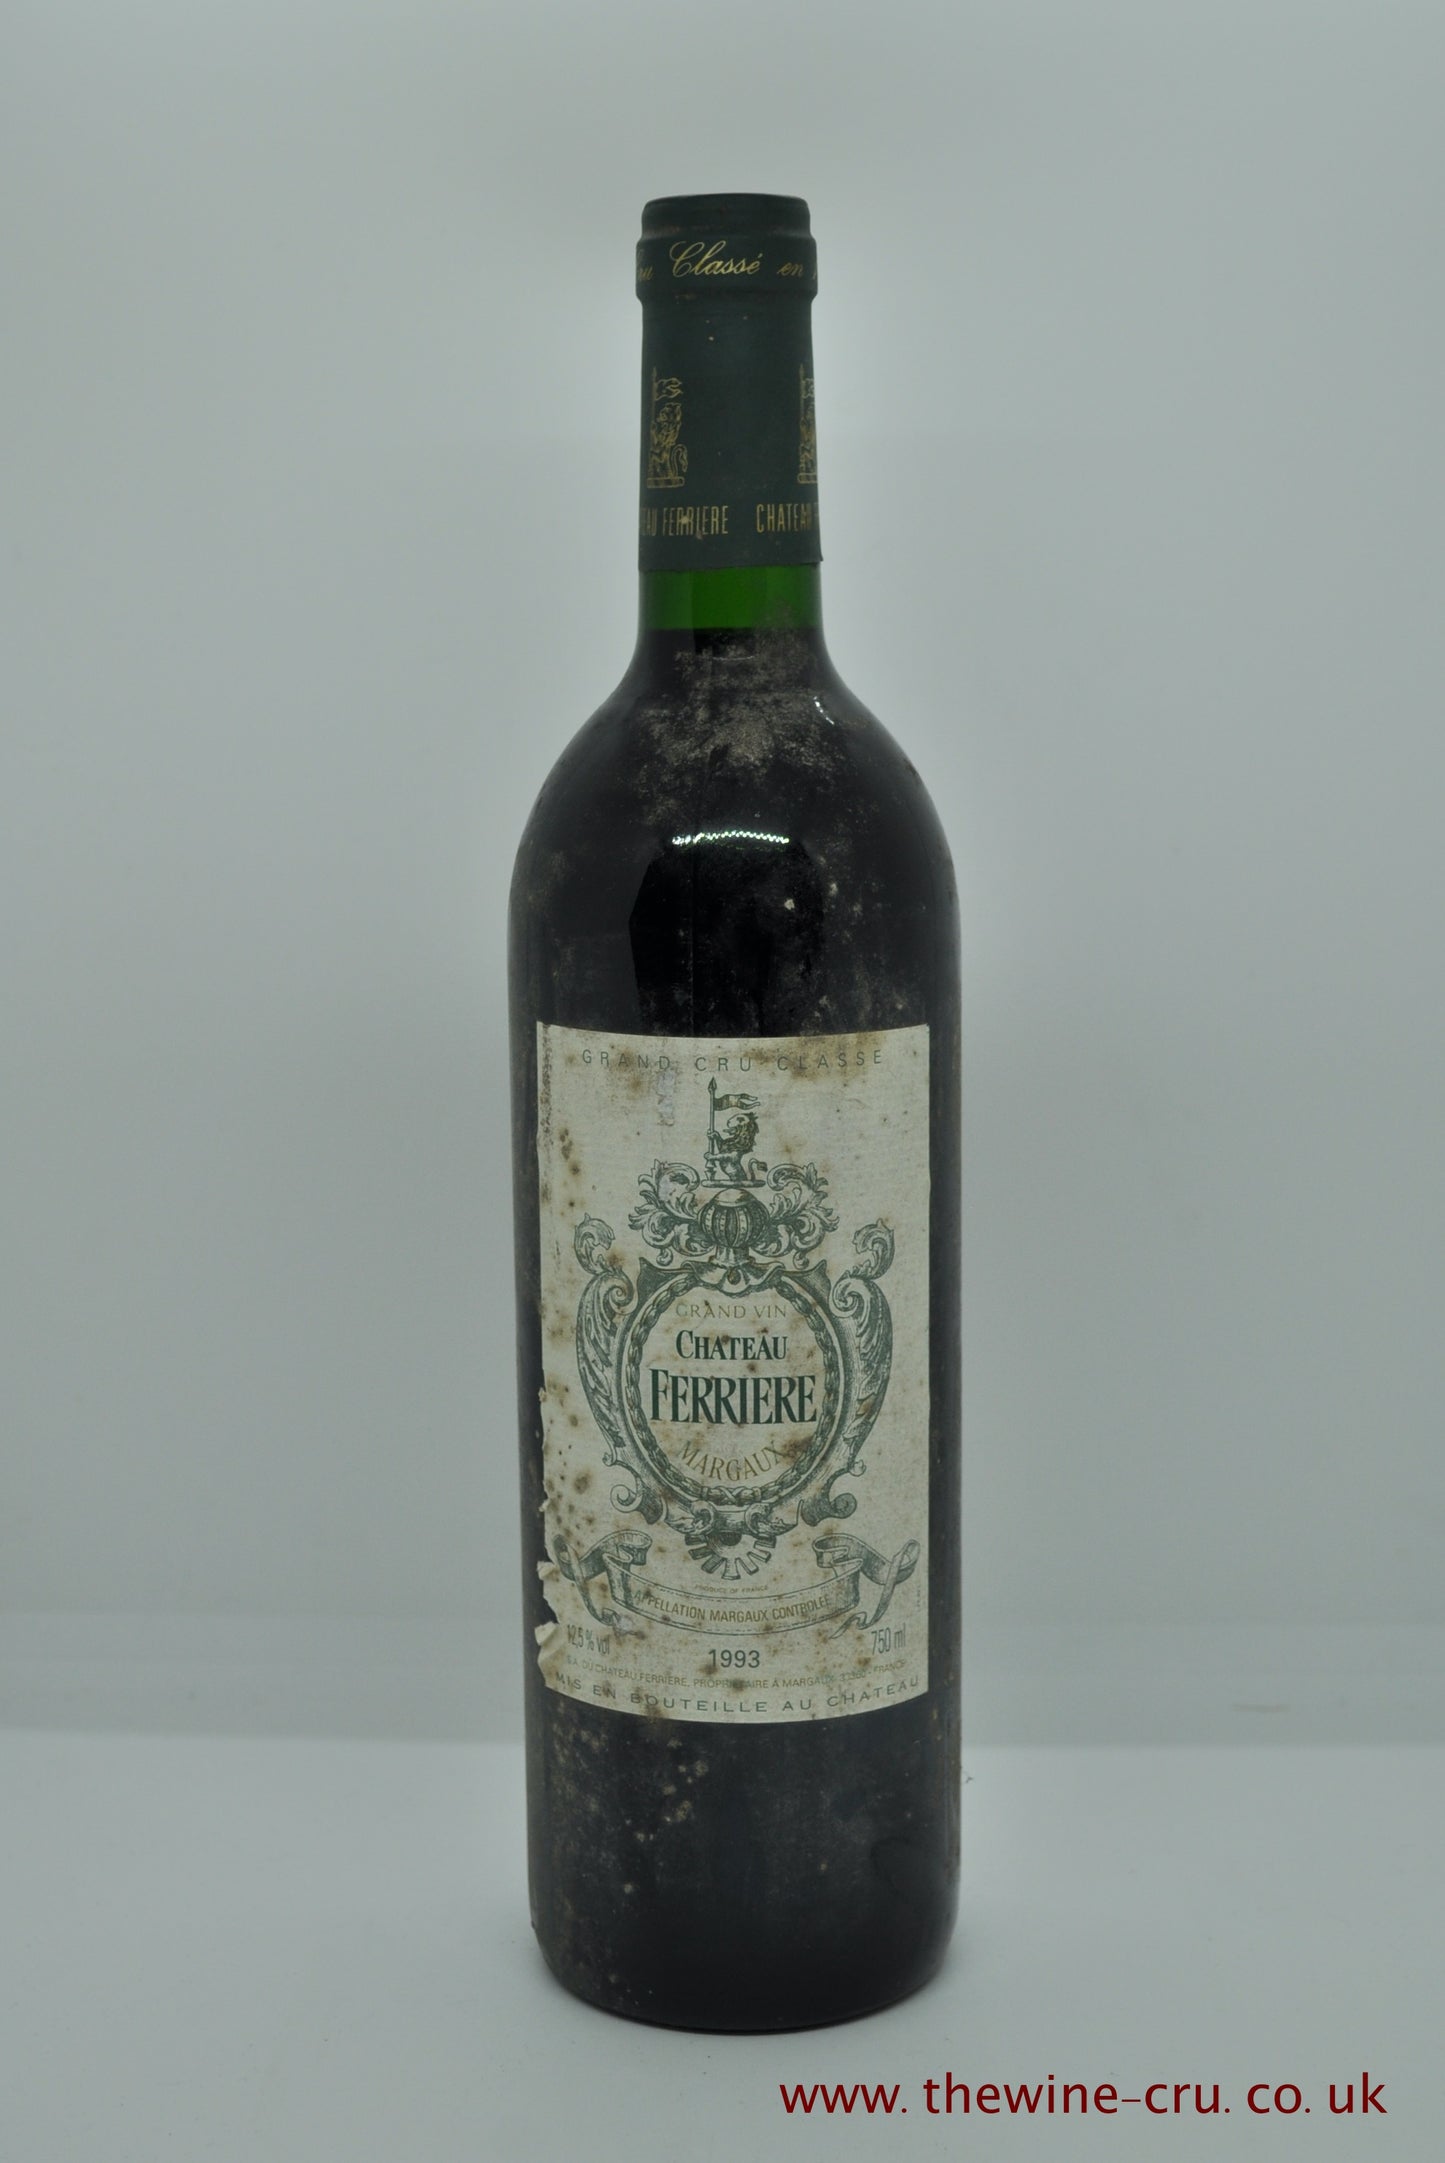 A bottle of 1993 vintage red wine. Chateau Ferriere 1993. France, Bordeaux. Immediate delivery. Free local delivery. Gift wrapping available.